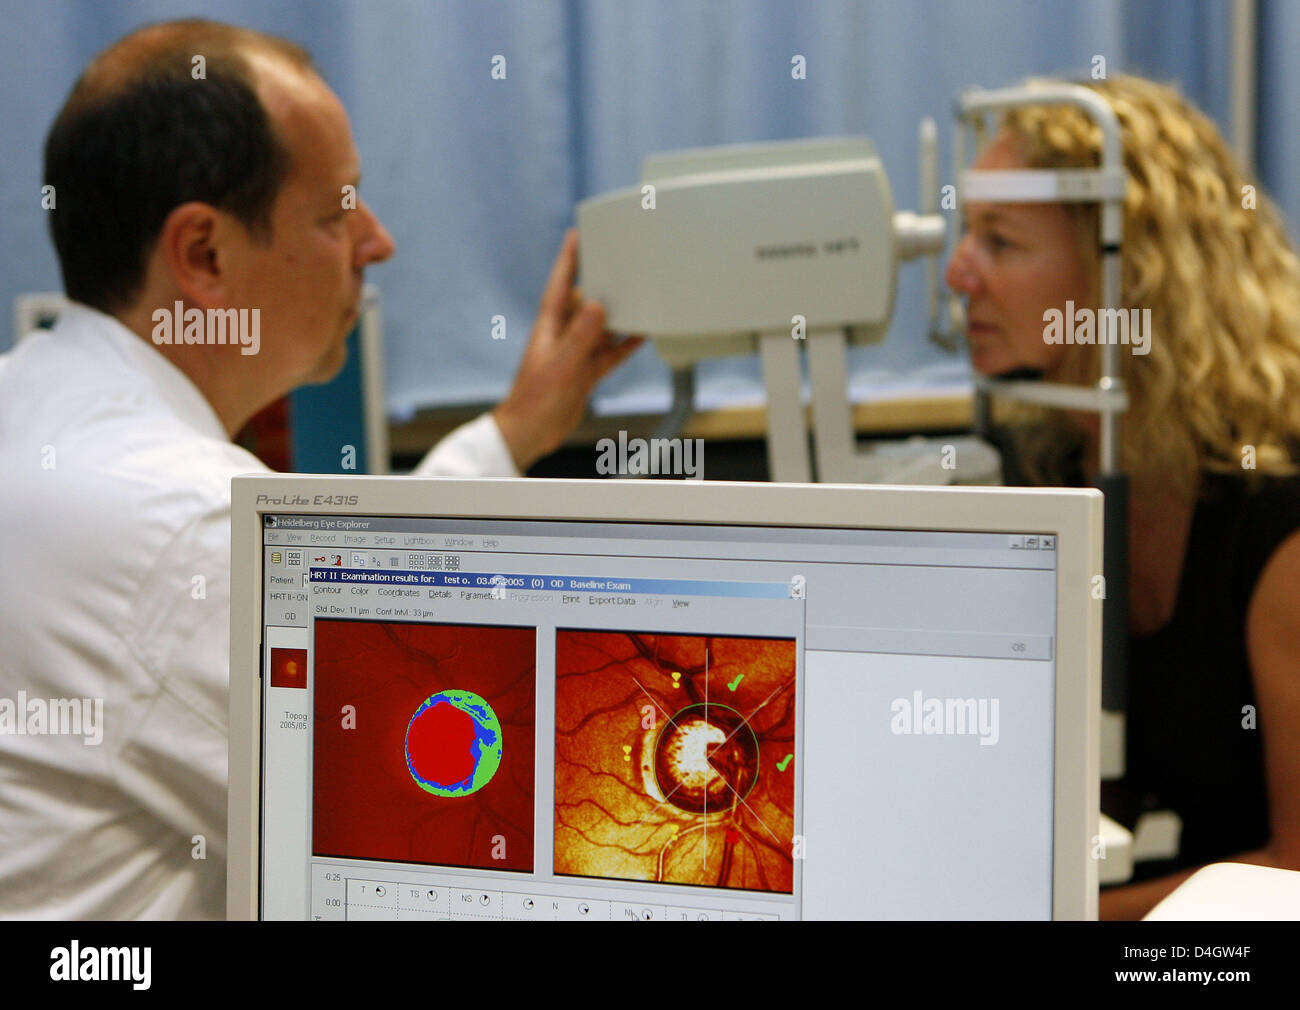 A woman is pictured during a computer analysis of the optic nerv within the scope of a glaucoma preventive examination carried out by a doctor of the university eye clinic in Erlangen, Germany, 26 June 2008. Glaucoma (also known as 'Green Star') is one of the major causes for loss of sight. Unnoticed by the patient the disease starts with the loss of the sensory cells of the optic  Stock Photo